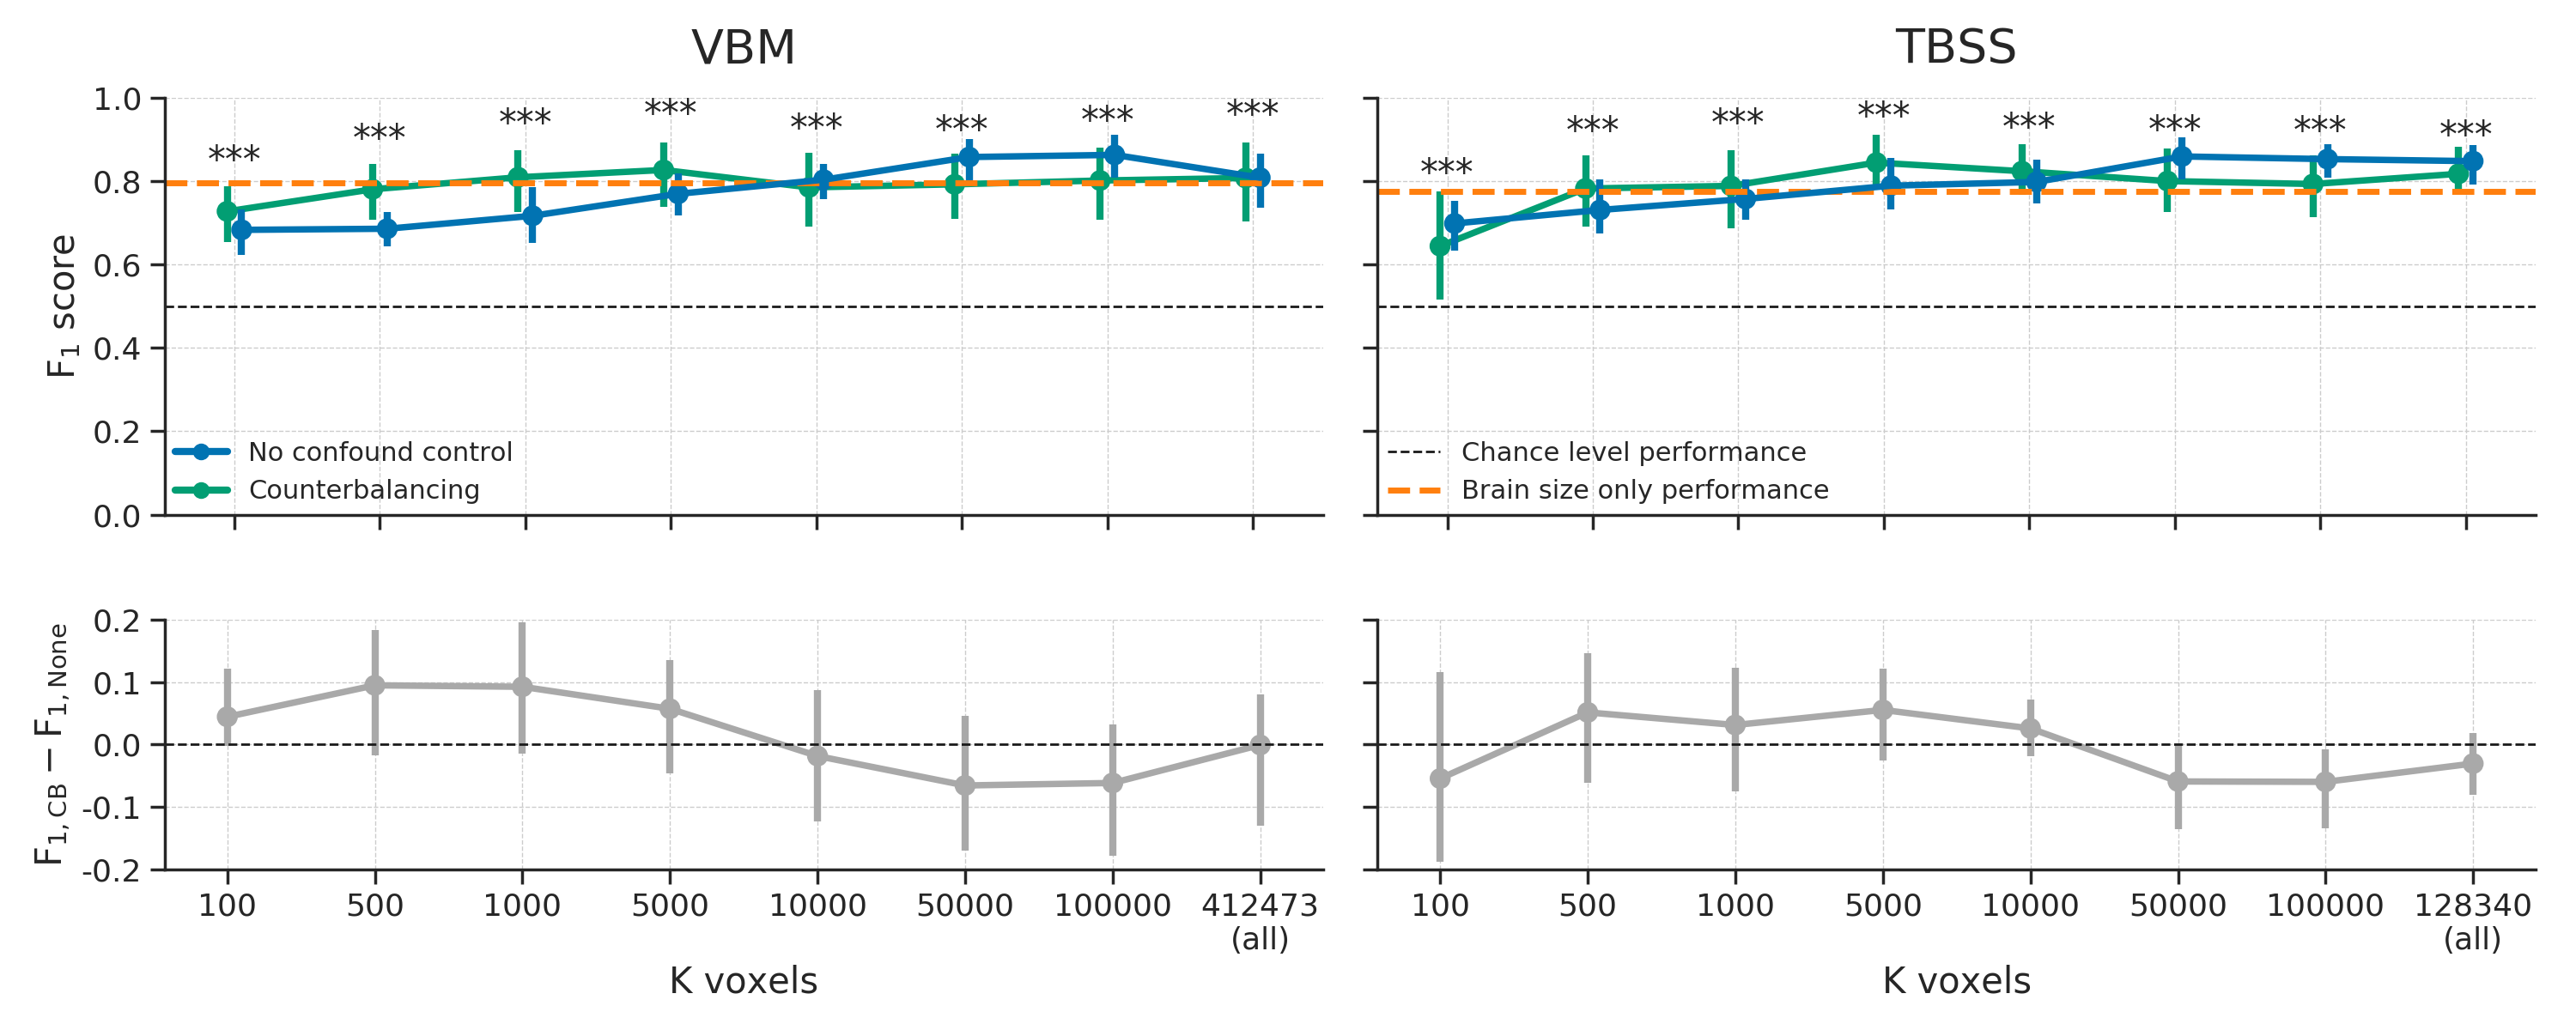 Model performance after counterbalancing (green) versus the baseline performance (blue) for both the VBM (left) and TBSS (right) data (upper row) and the difference in performance between the methods (lower row). Performance reflects the average (difference) \(F_{1}\) score across 10 folds; error bars reflect 95% confidence intervals. The dashed black line reflect theoretical chance-level performance (0.5) and the dashed orange line reflects the average model performance when only brain size is used as a predictor. Asterisks indicates significant performance above chance: *** = \(p < 0.001\), ** = \(p < 0.01\), * = \(p < 0.05\).